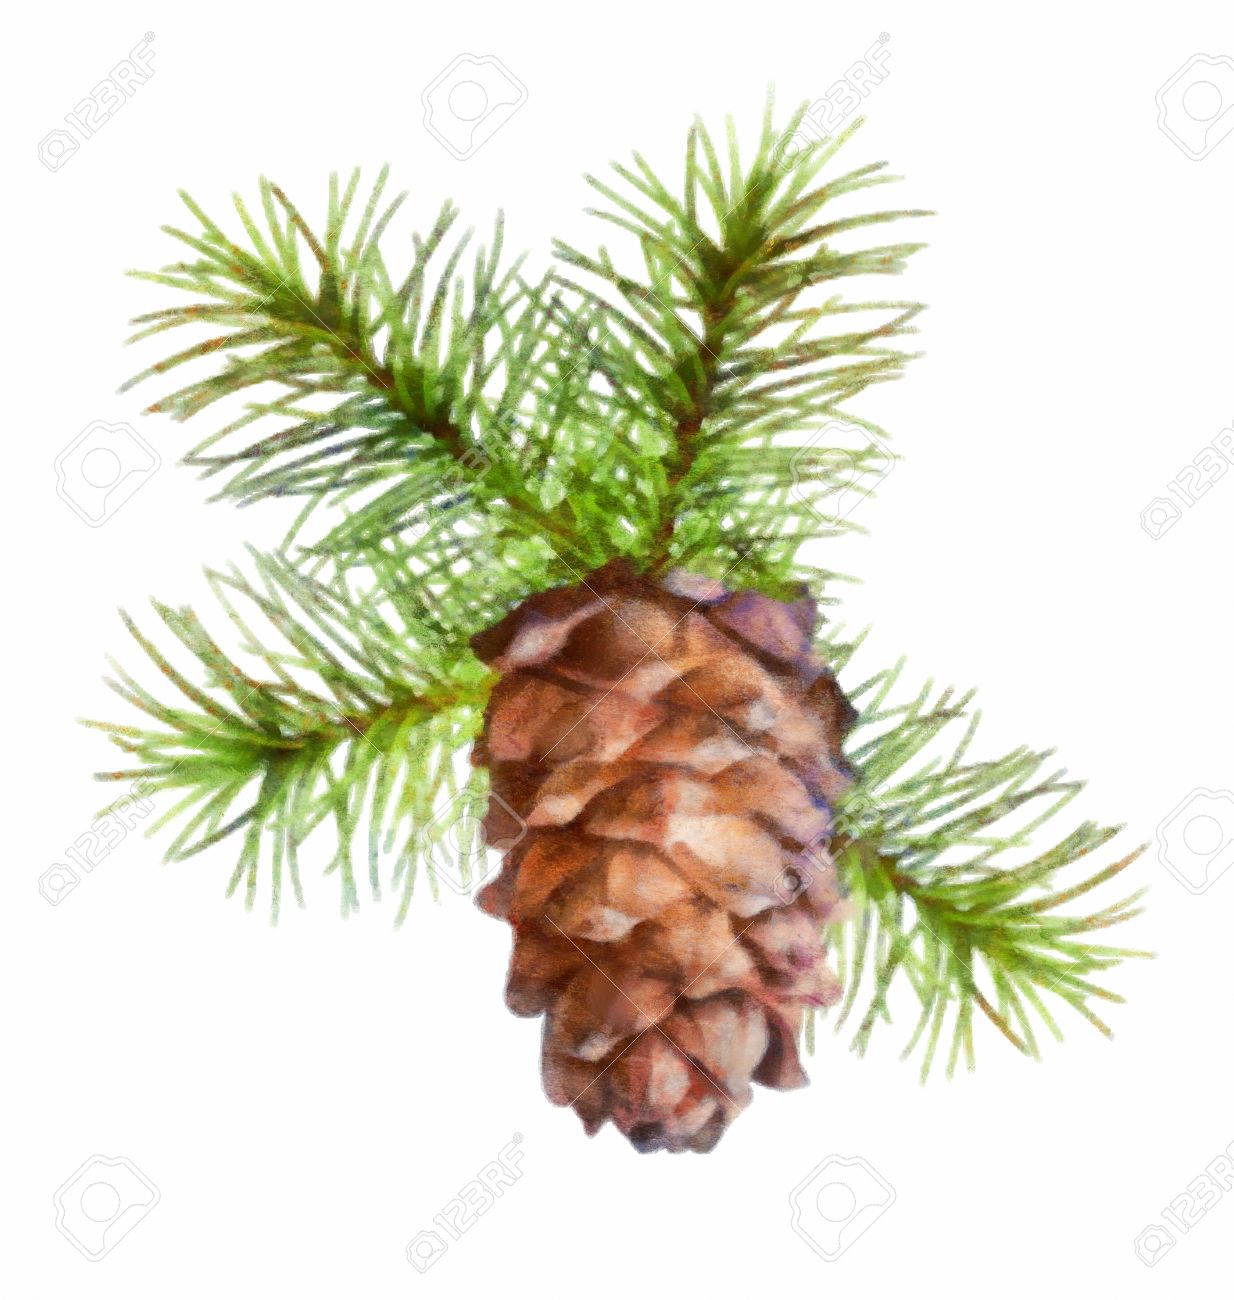 Pine Cone clipart #6, Download drawings